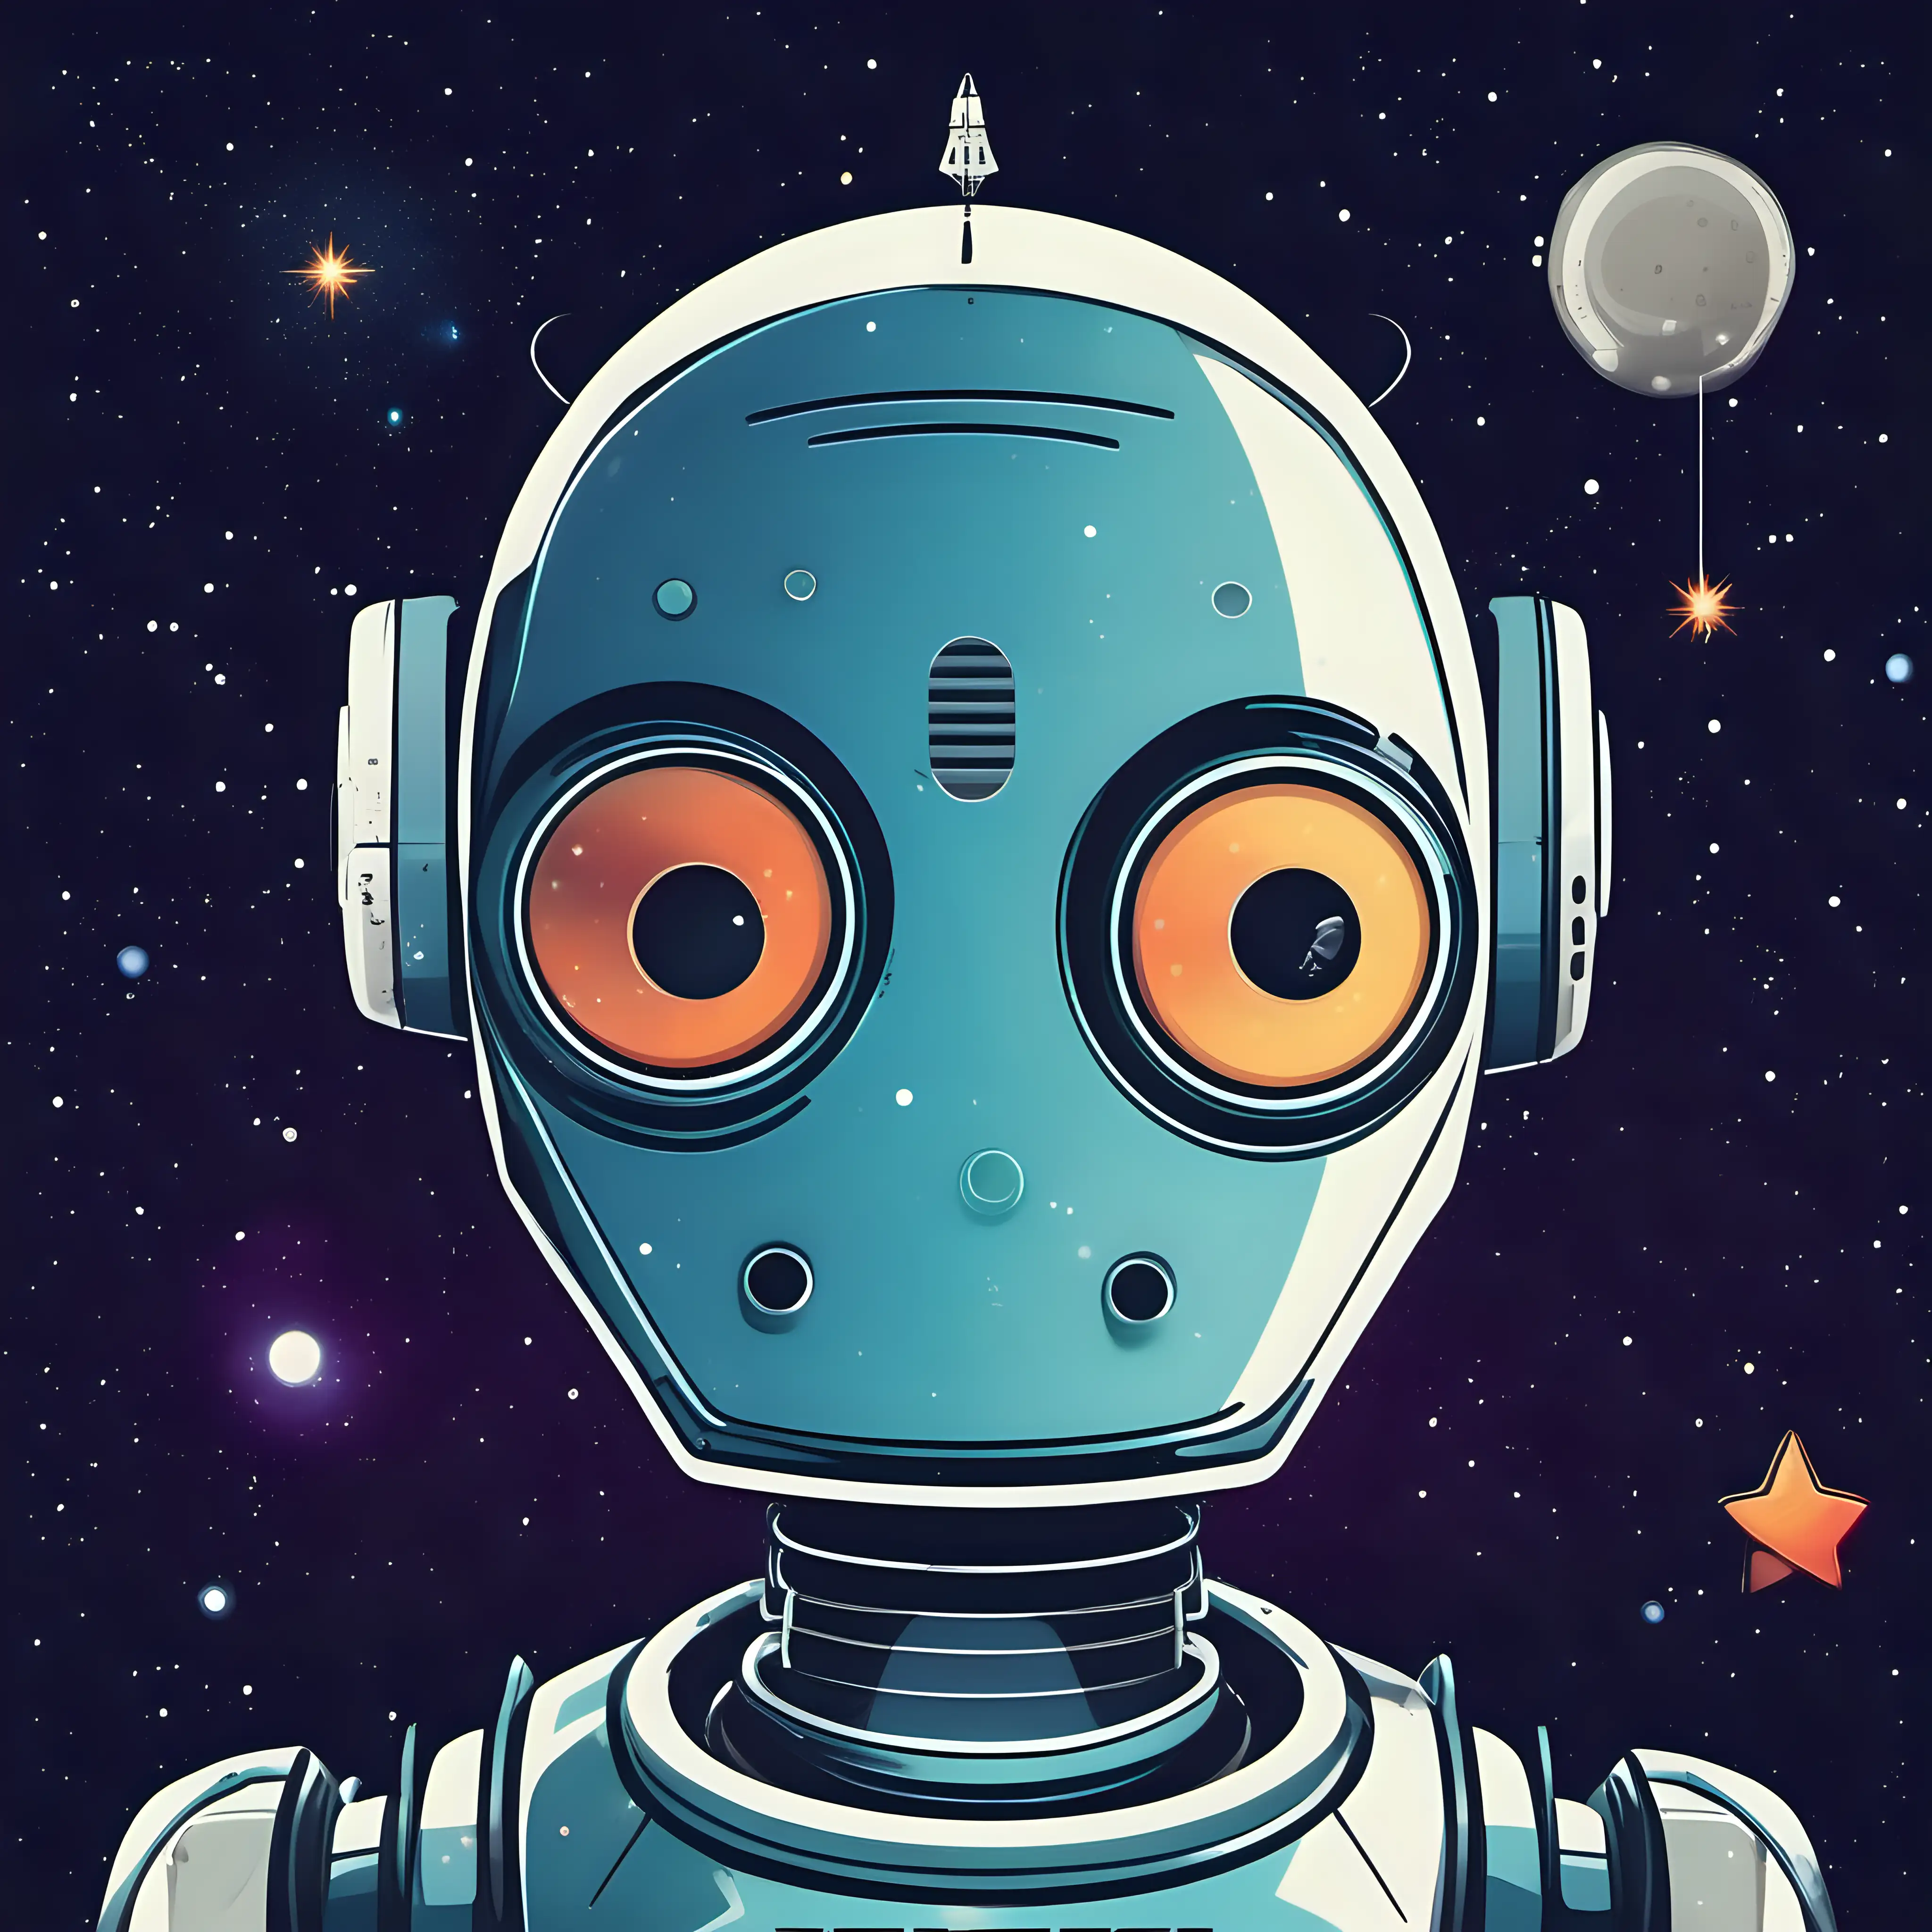 robot looking into the future, space background with a star.